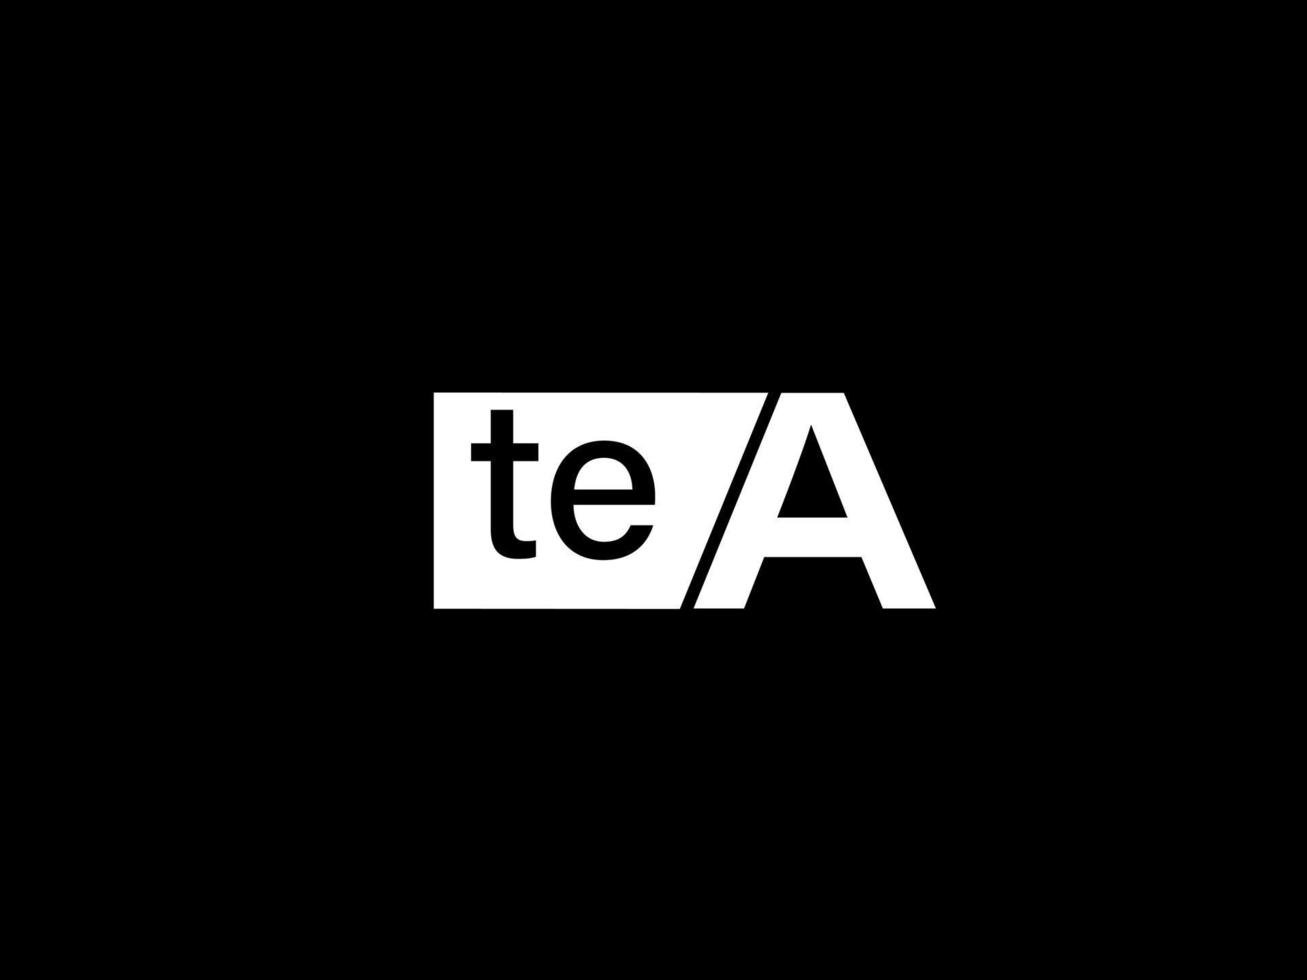 TEA Logo and Graphics design vector art, Icons isolated on black background